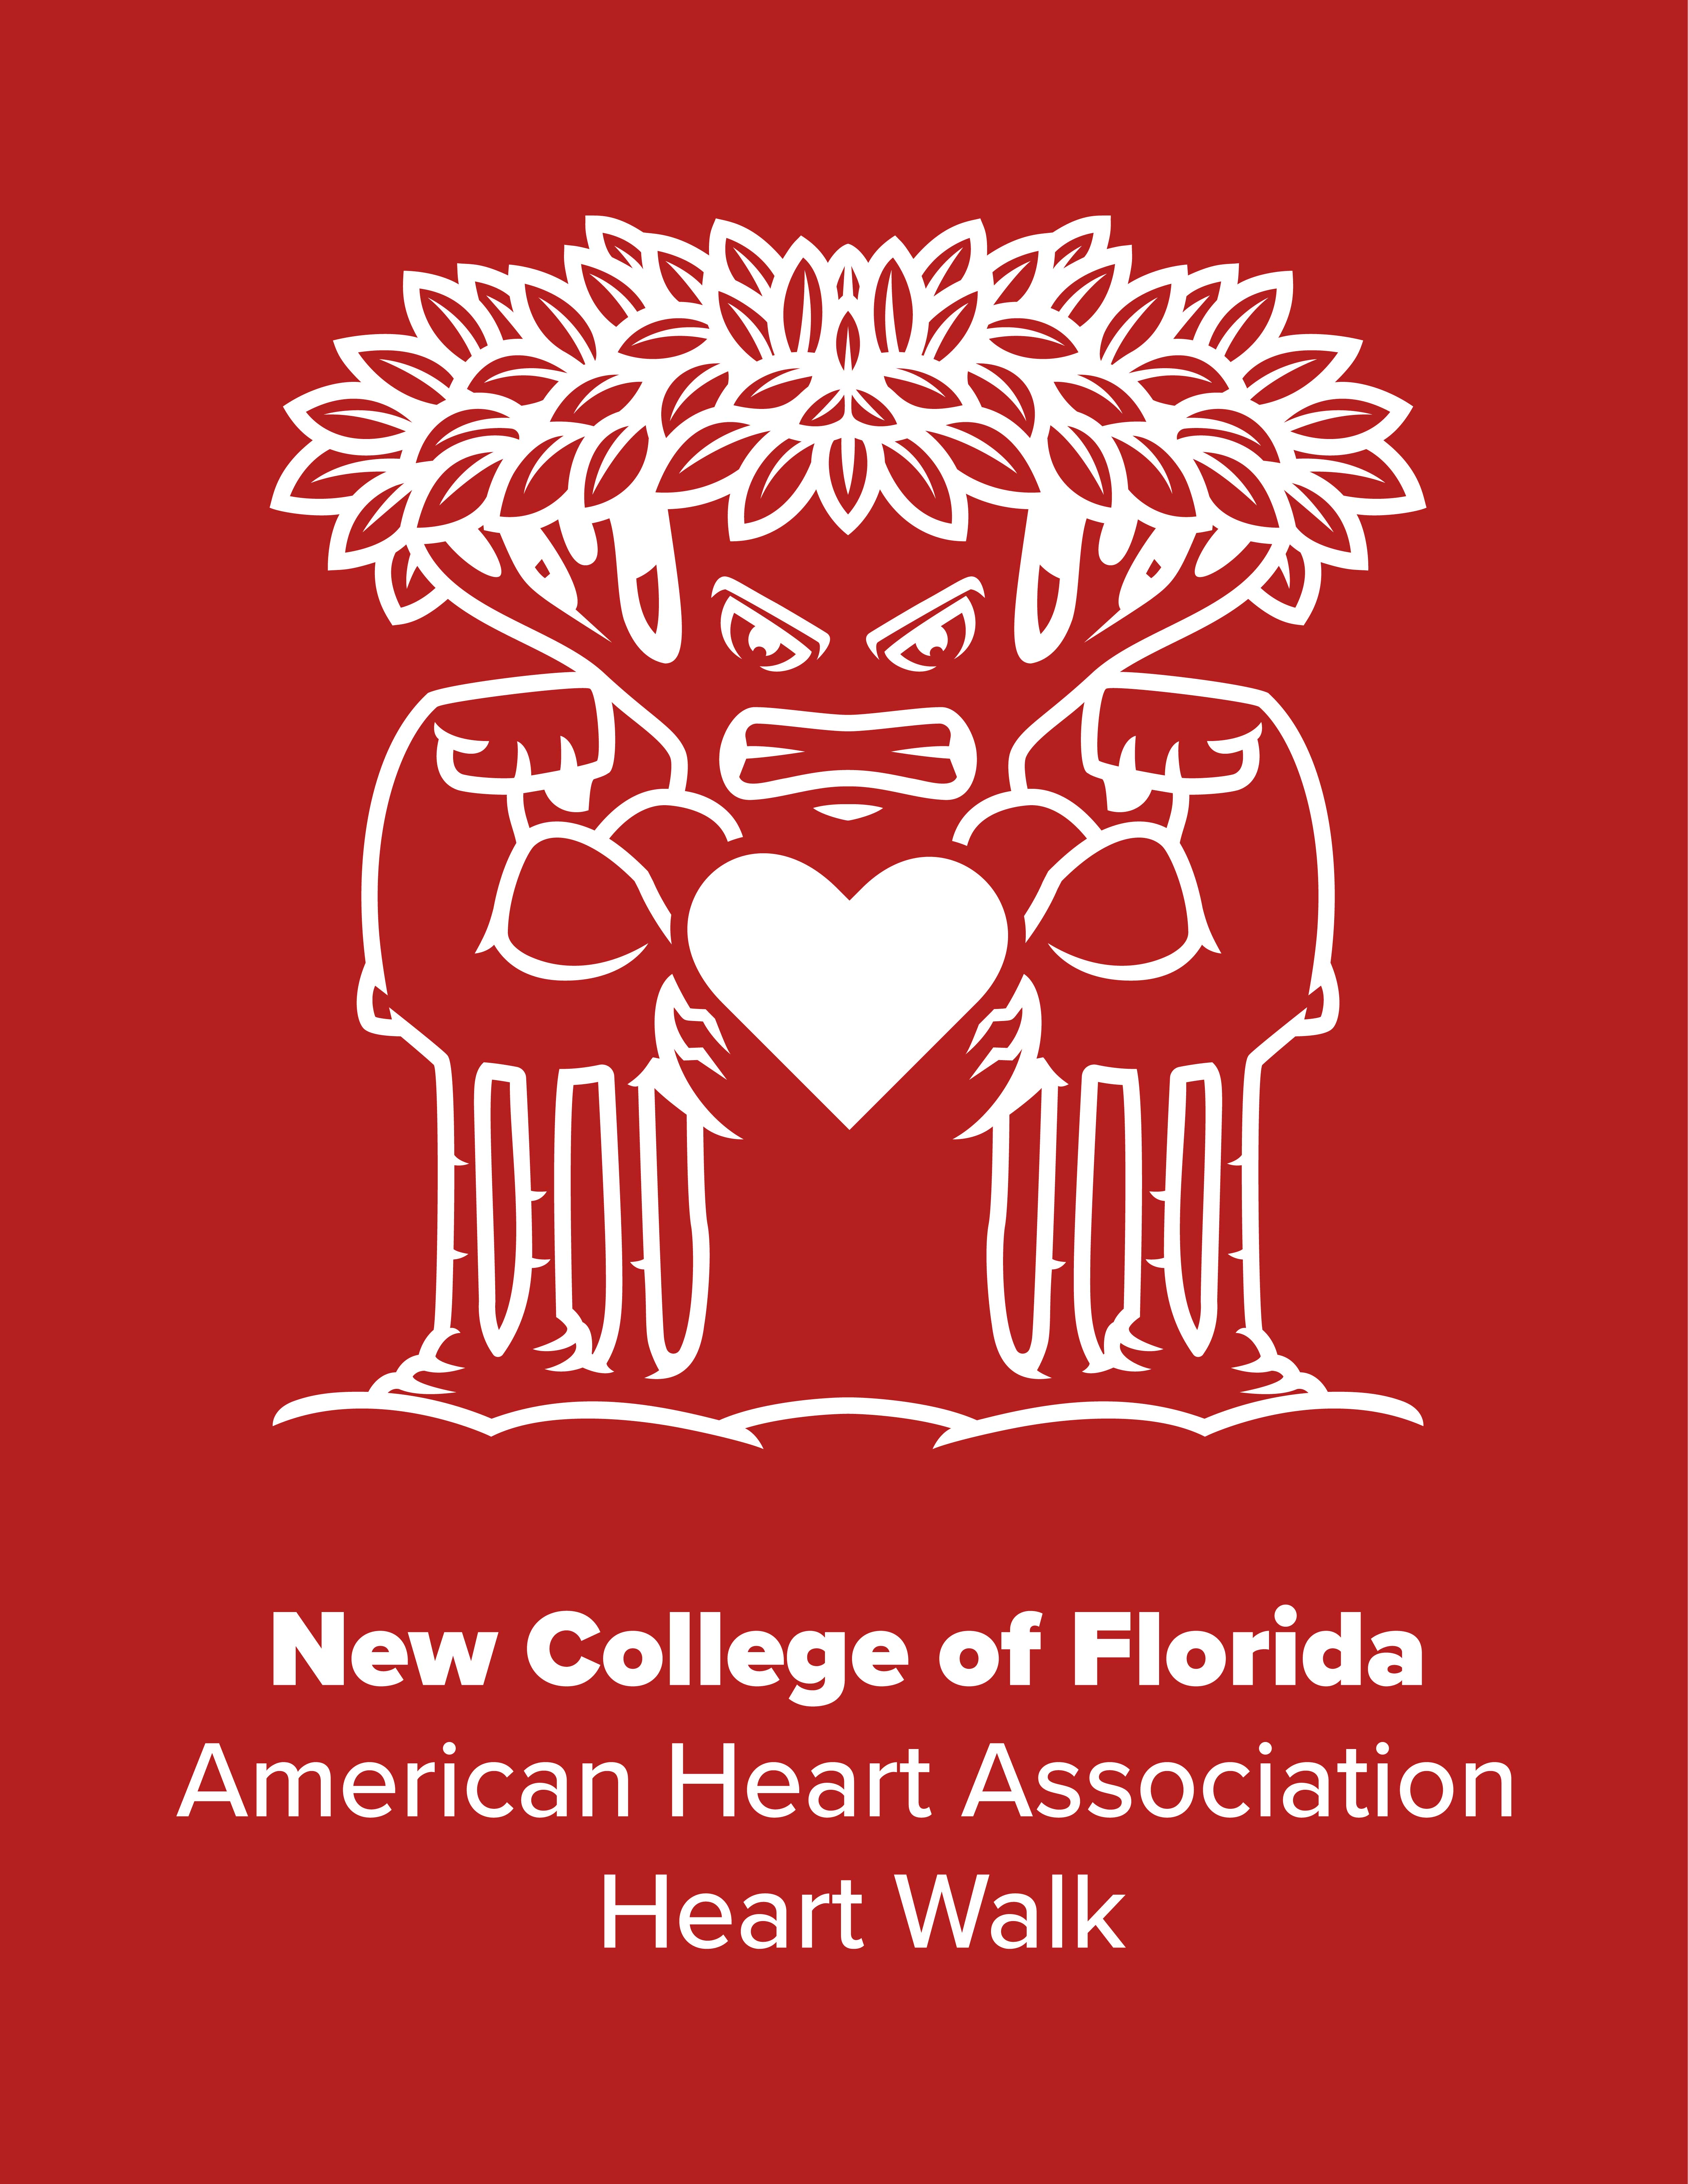 American Heart Association Heart Walk graphic featuring NCF Mighty Banyan